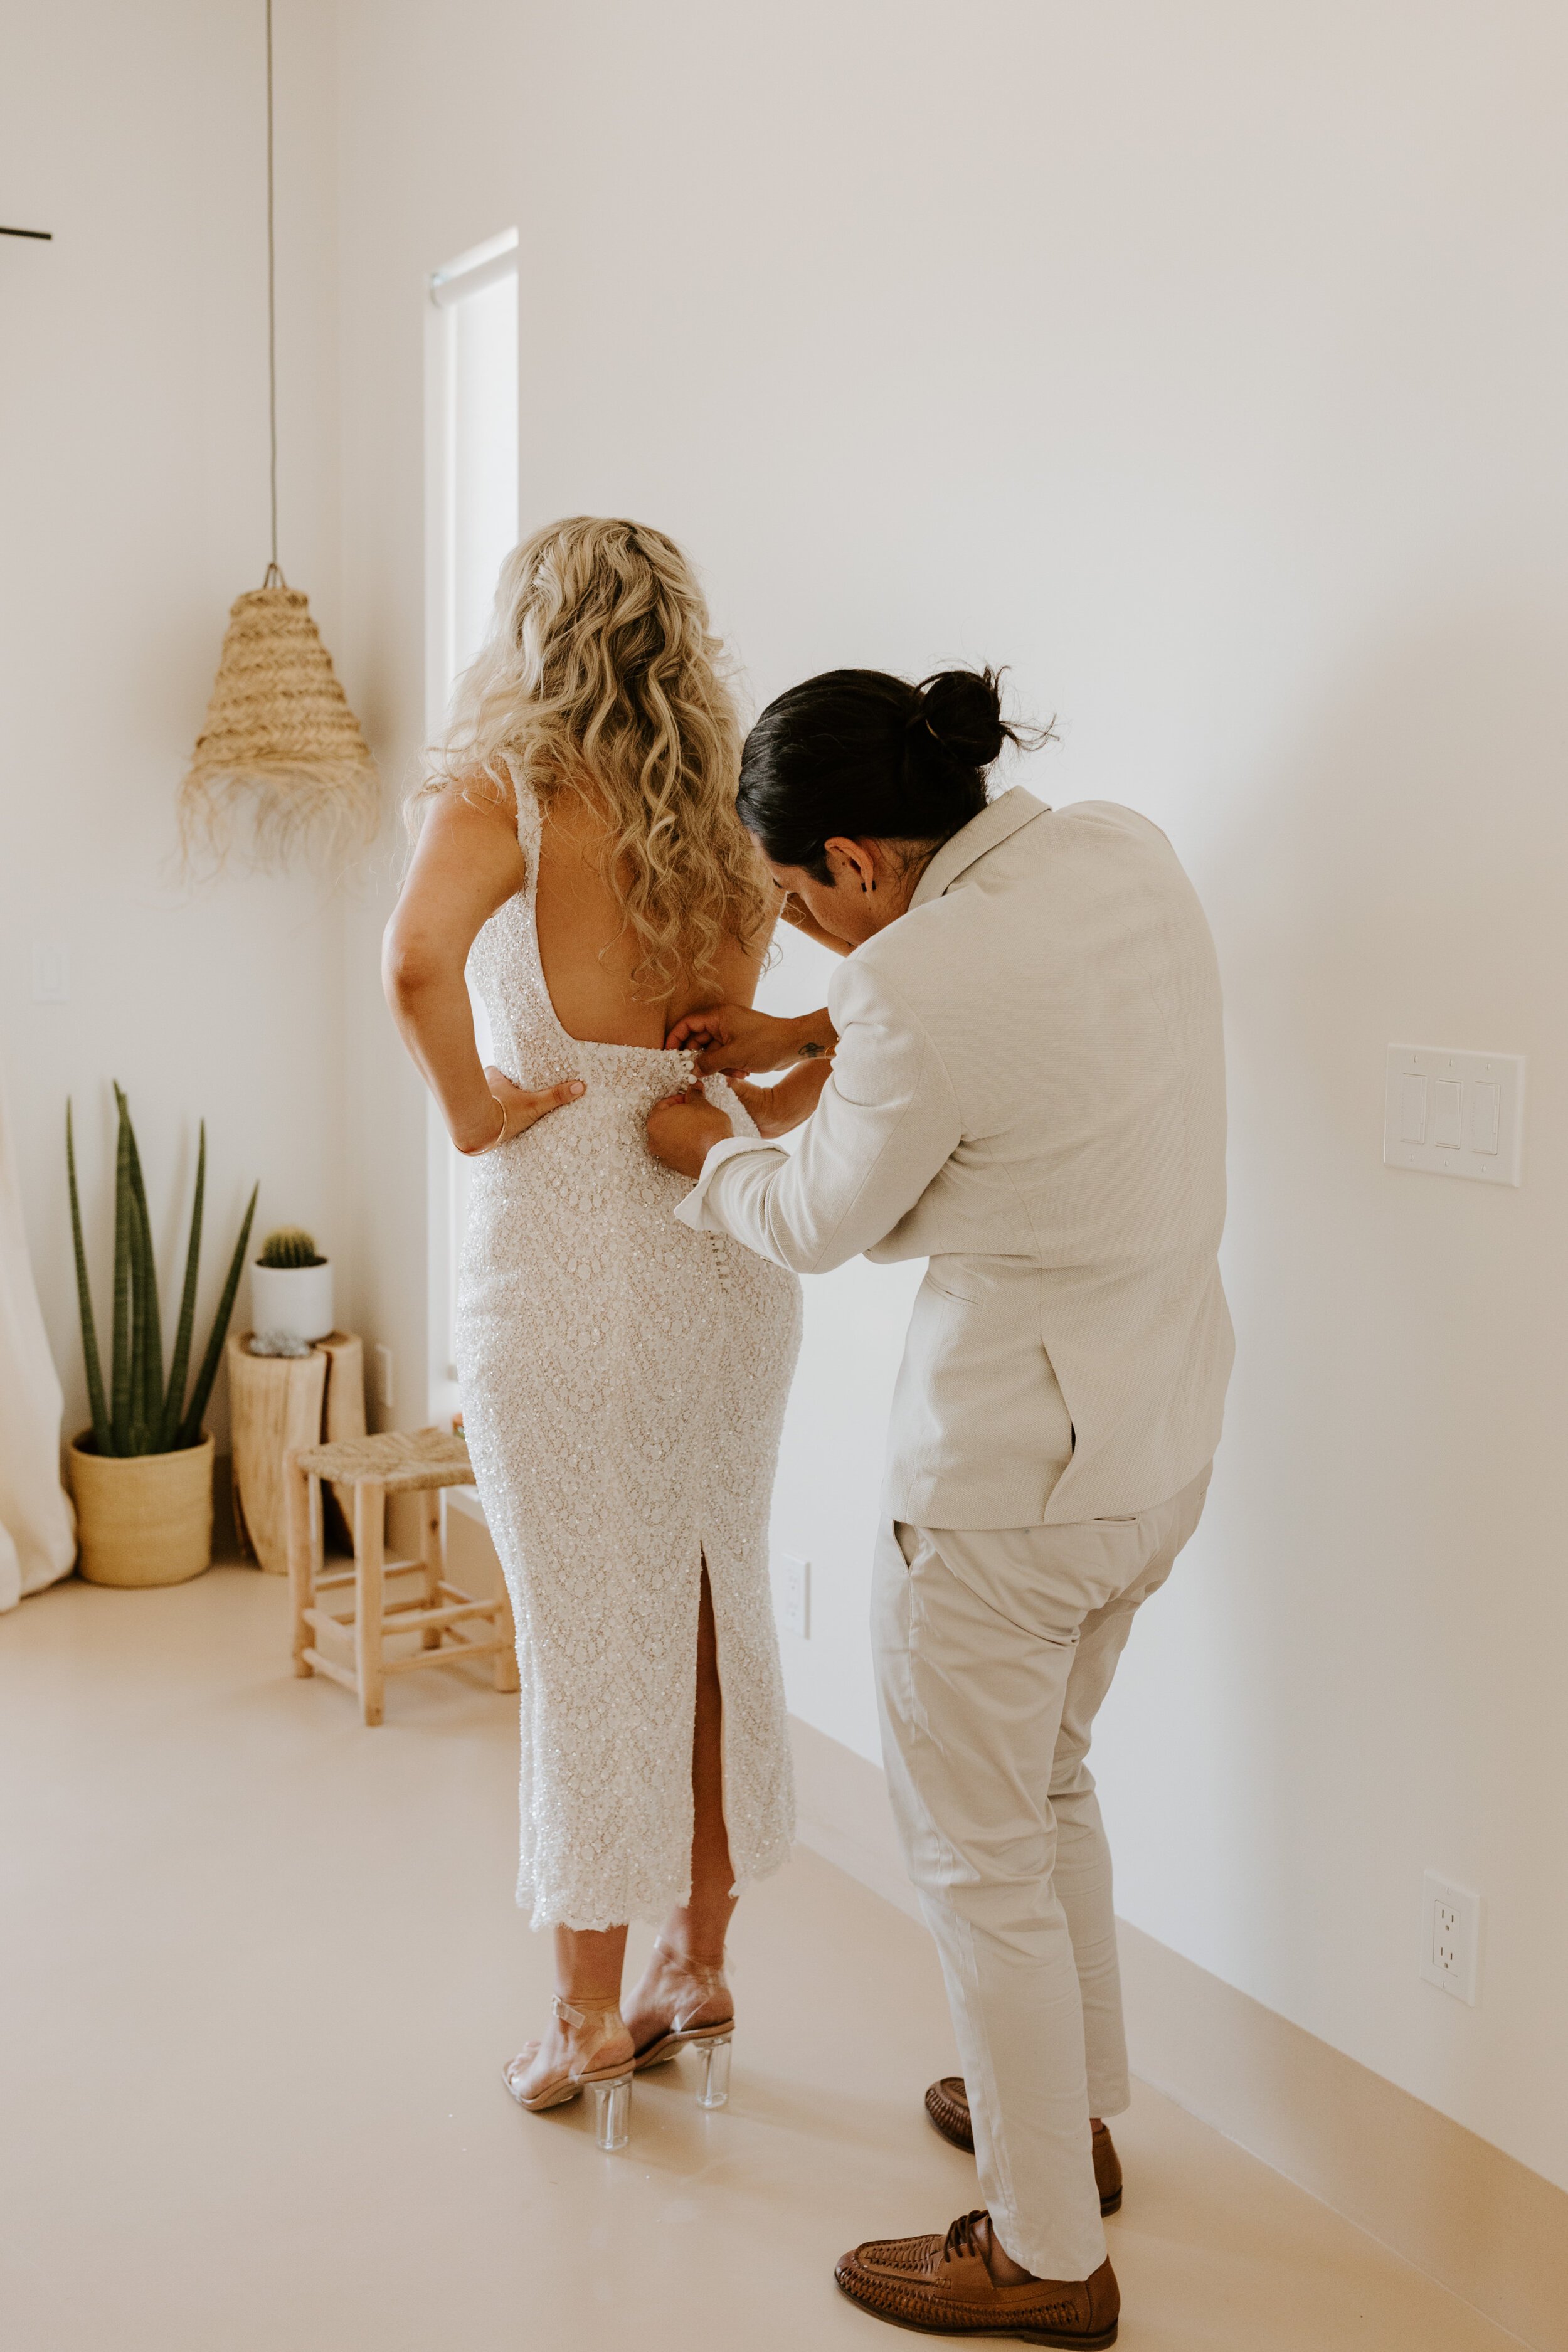 Bride and groom getting ready together | Joshua Tree Elopement | Tida Svy | www.tidasvy.com